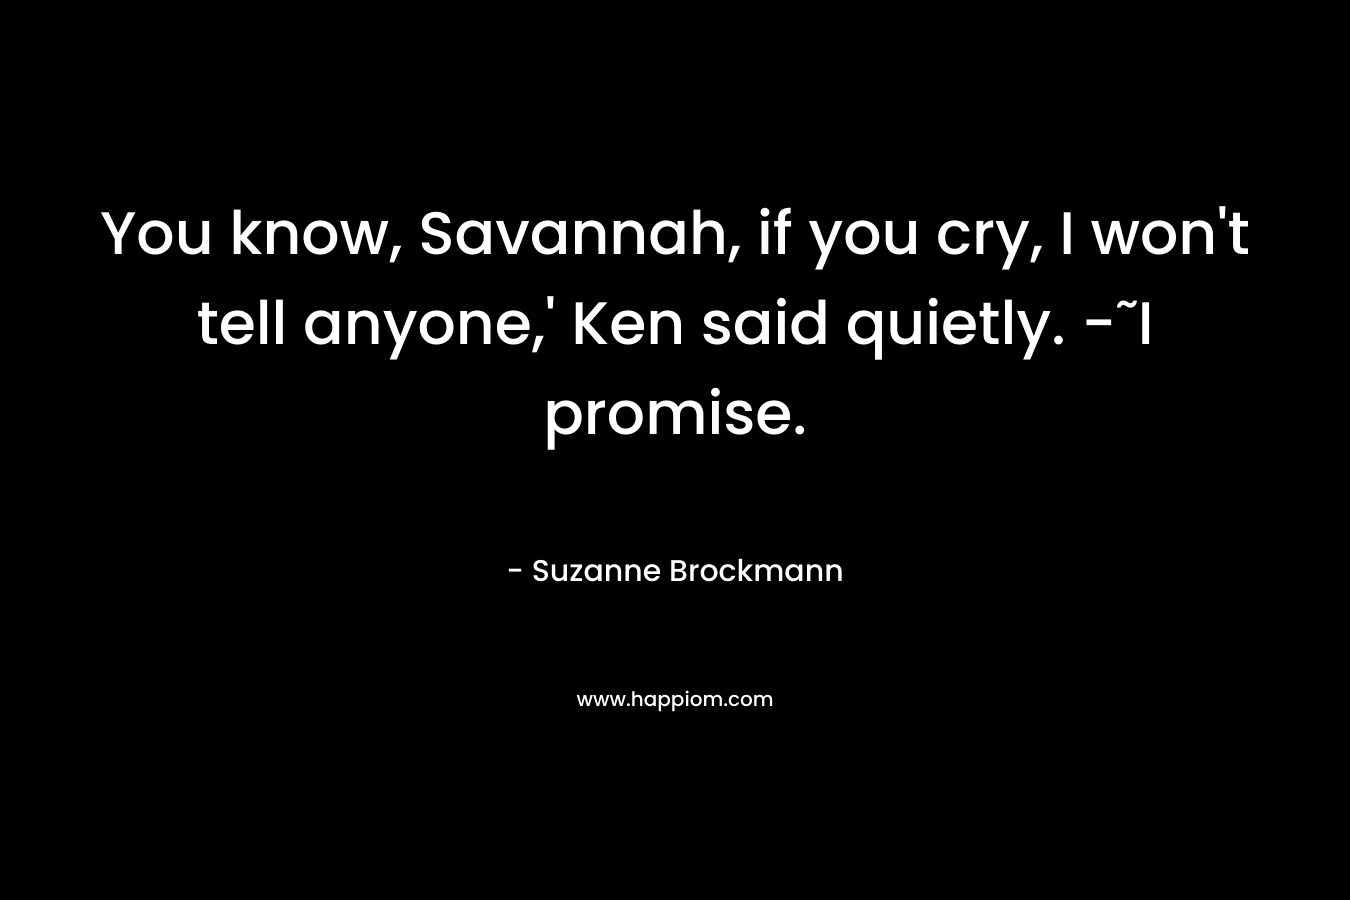 You know, Savannah, if you cry, I won’t tell anyone,’ Ken said quietly. -˜I promise. – Suzanne Brockmann